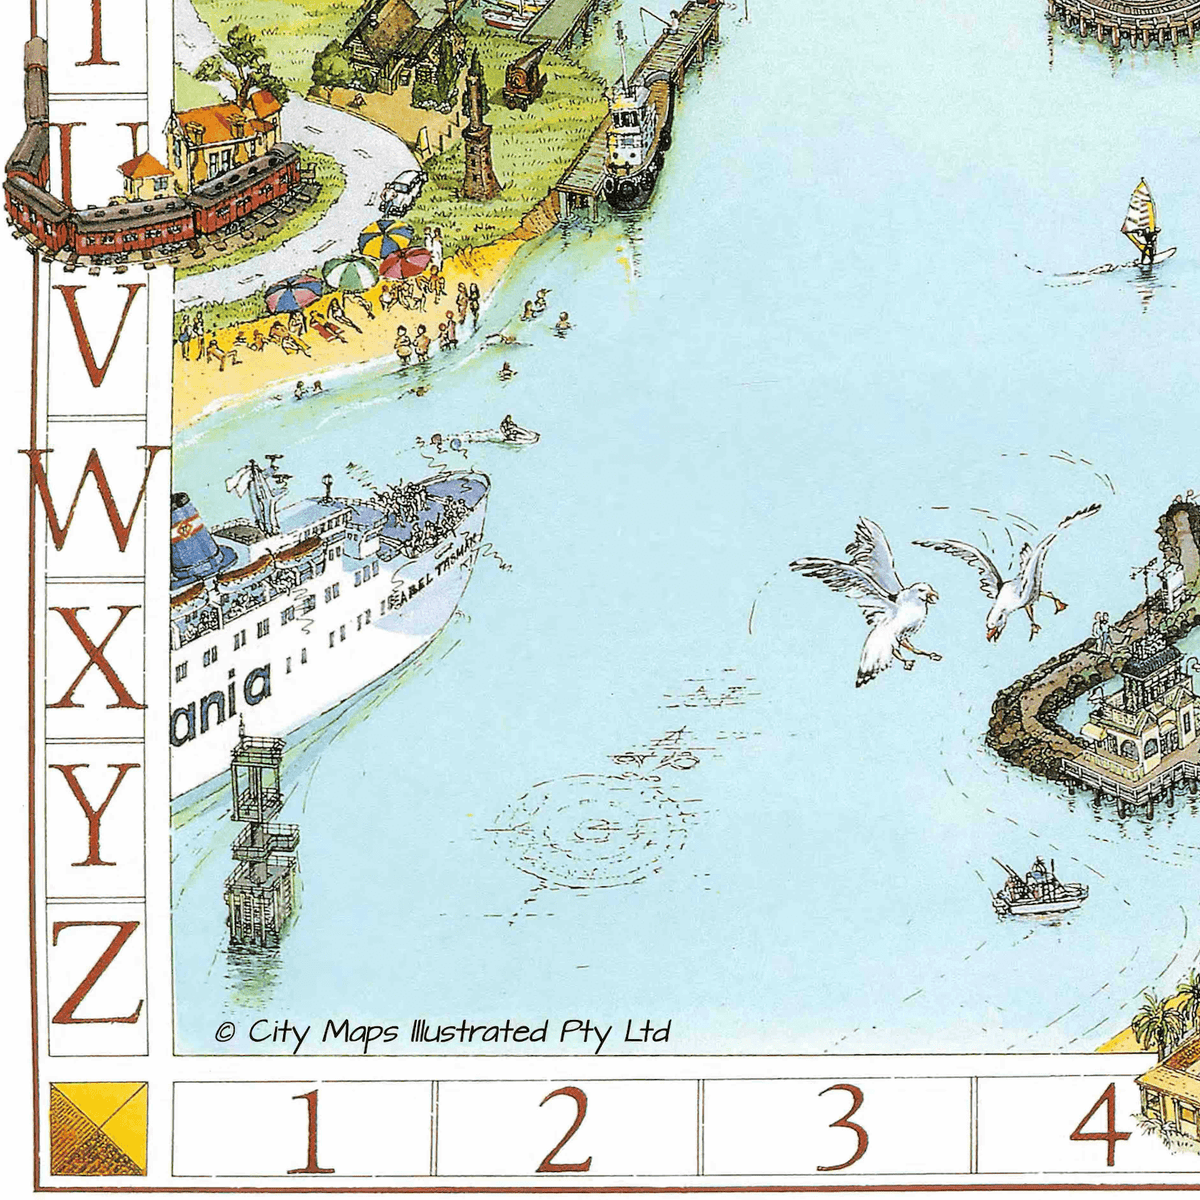 The bottom right corner of the 1991 Vintage Melbourne Map. The image shows the detail of the drawing, part of the Spirit of Tasmania, and the axis. 